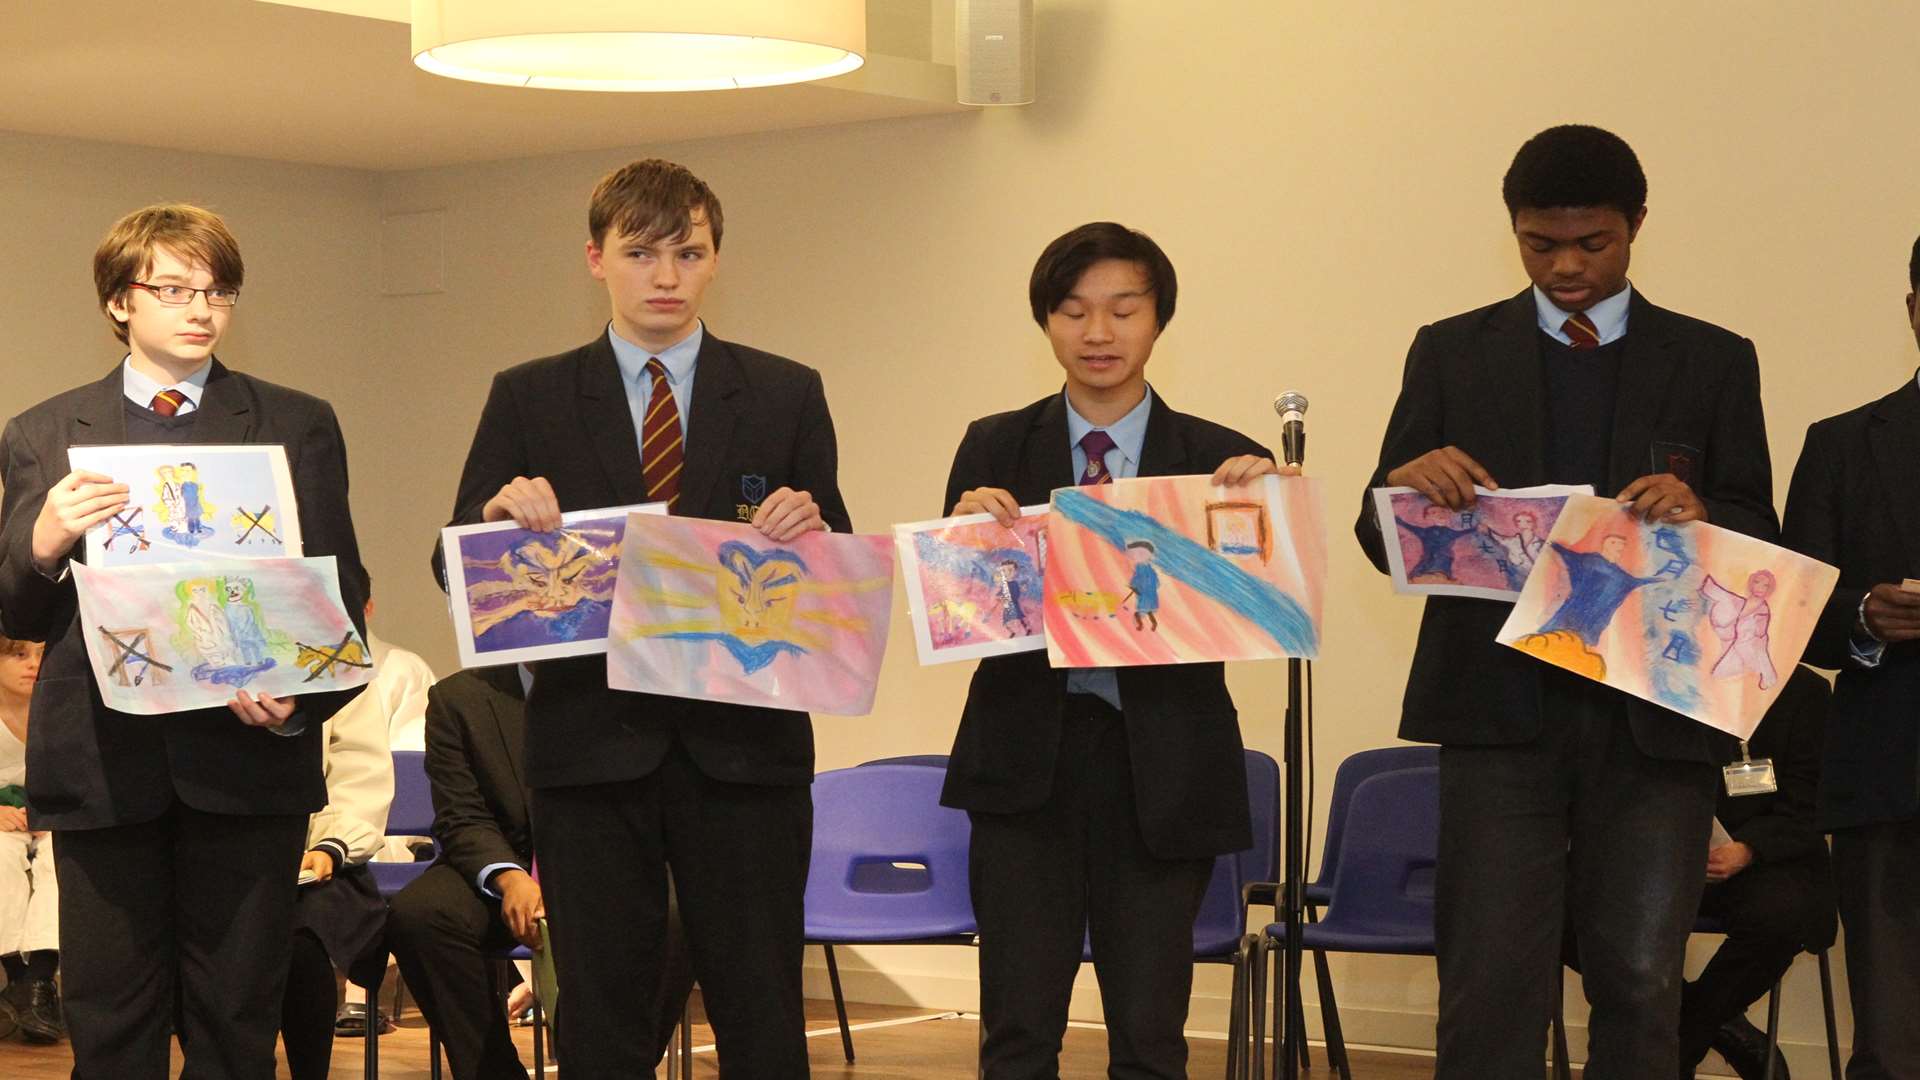 Youngsters from Dartford Grammar School show their art work as they recite haikus.